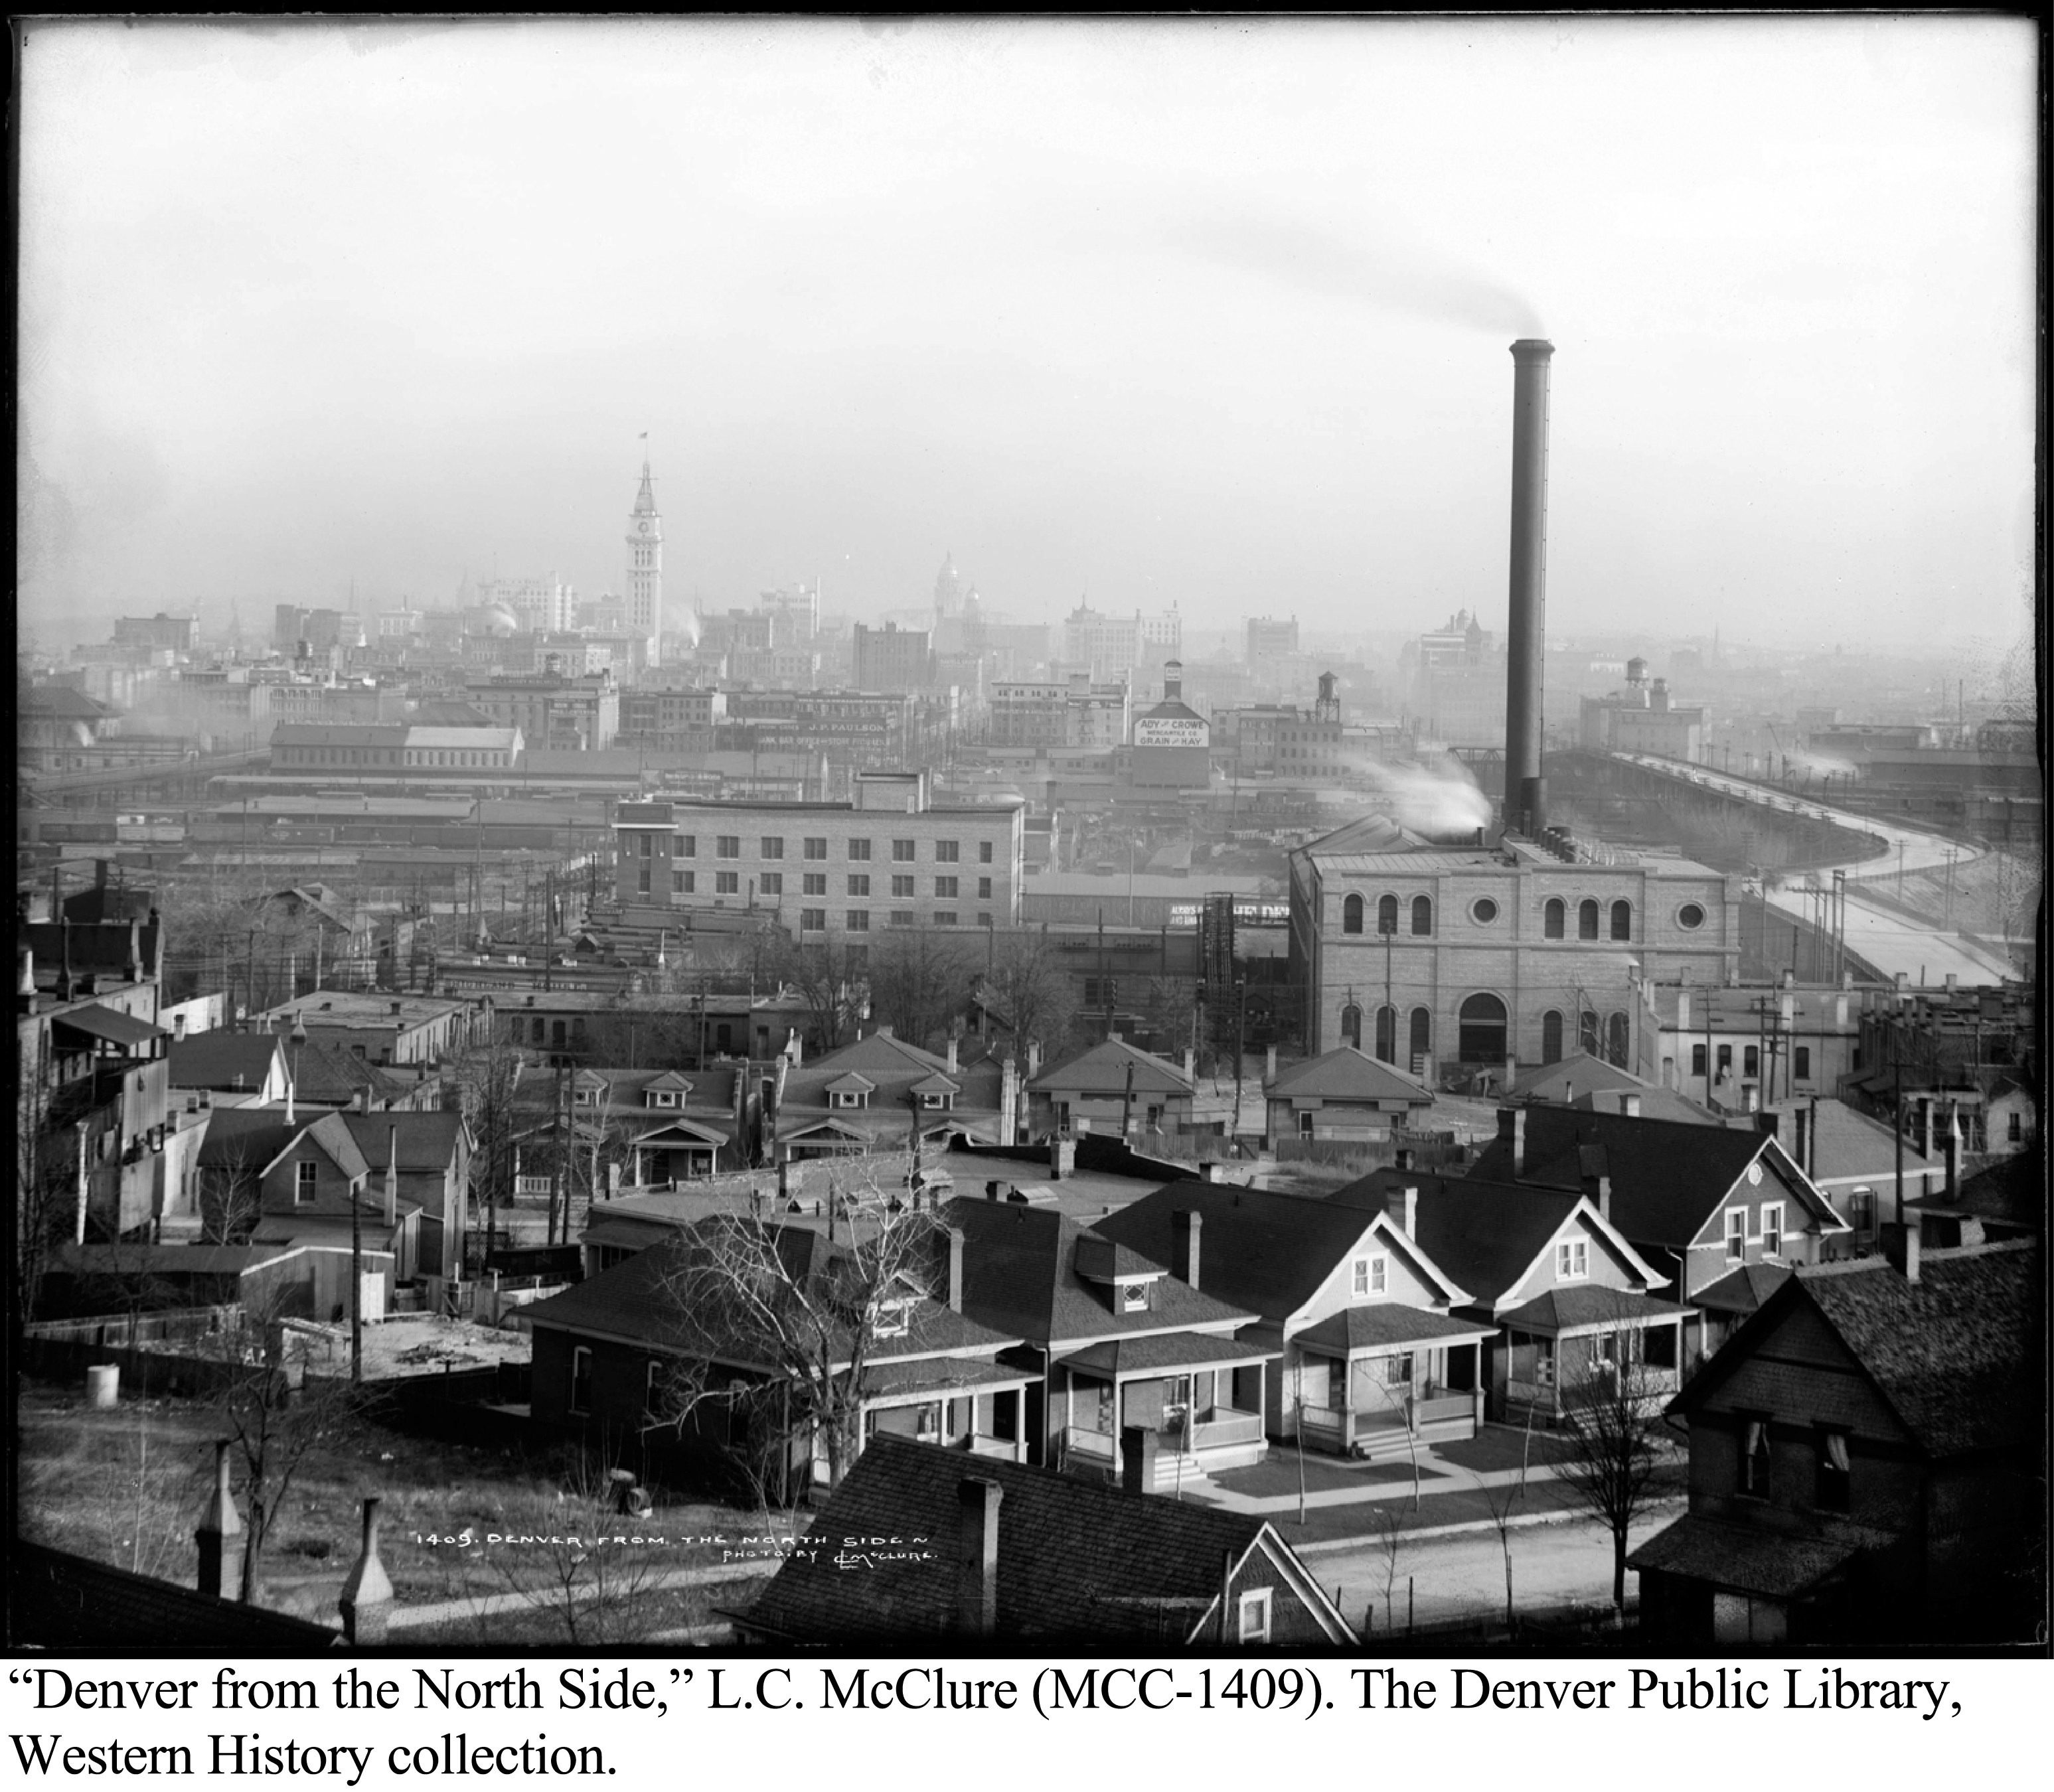 Denver from the North Side, 1911